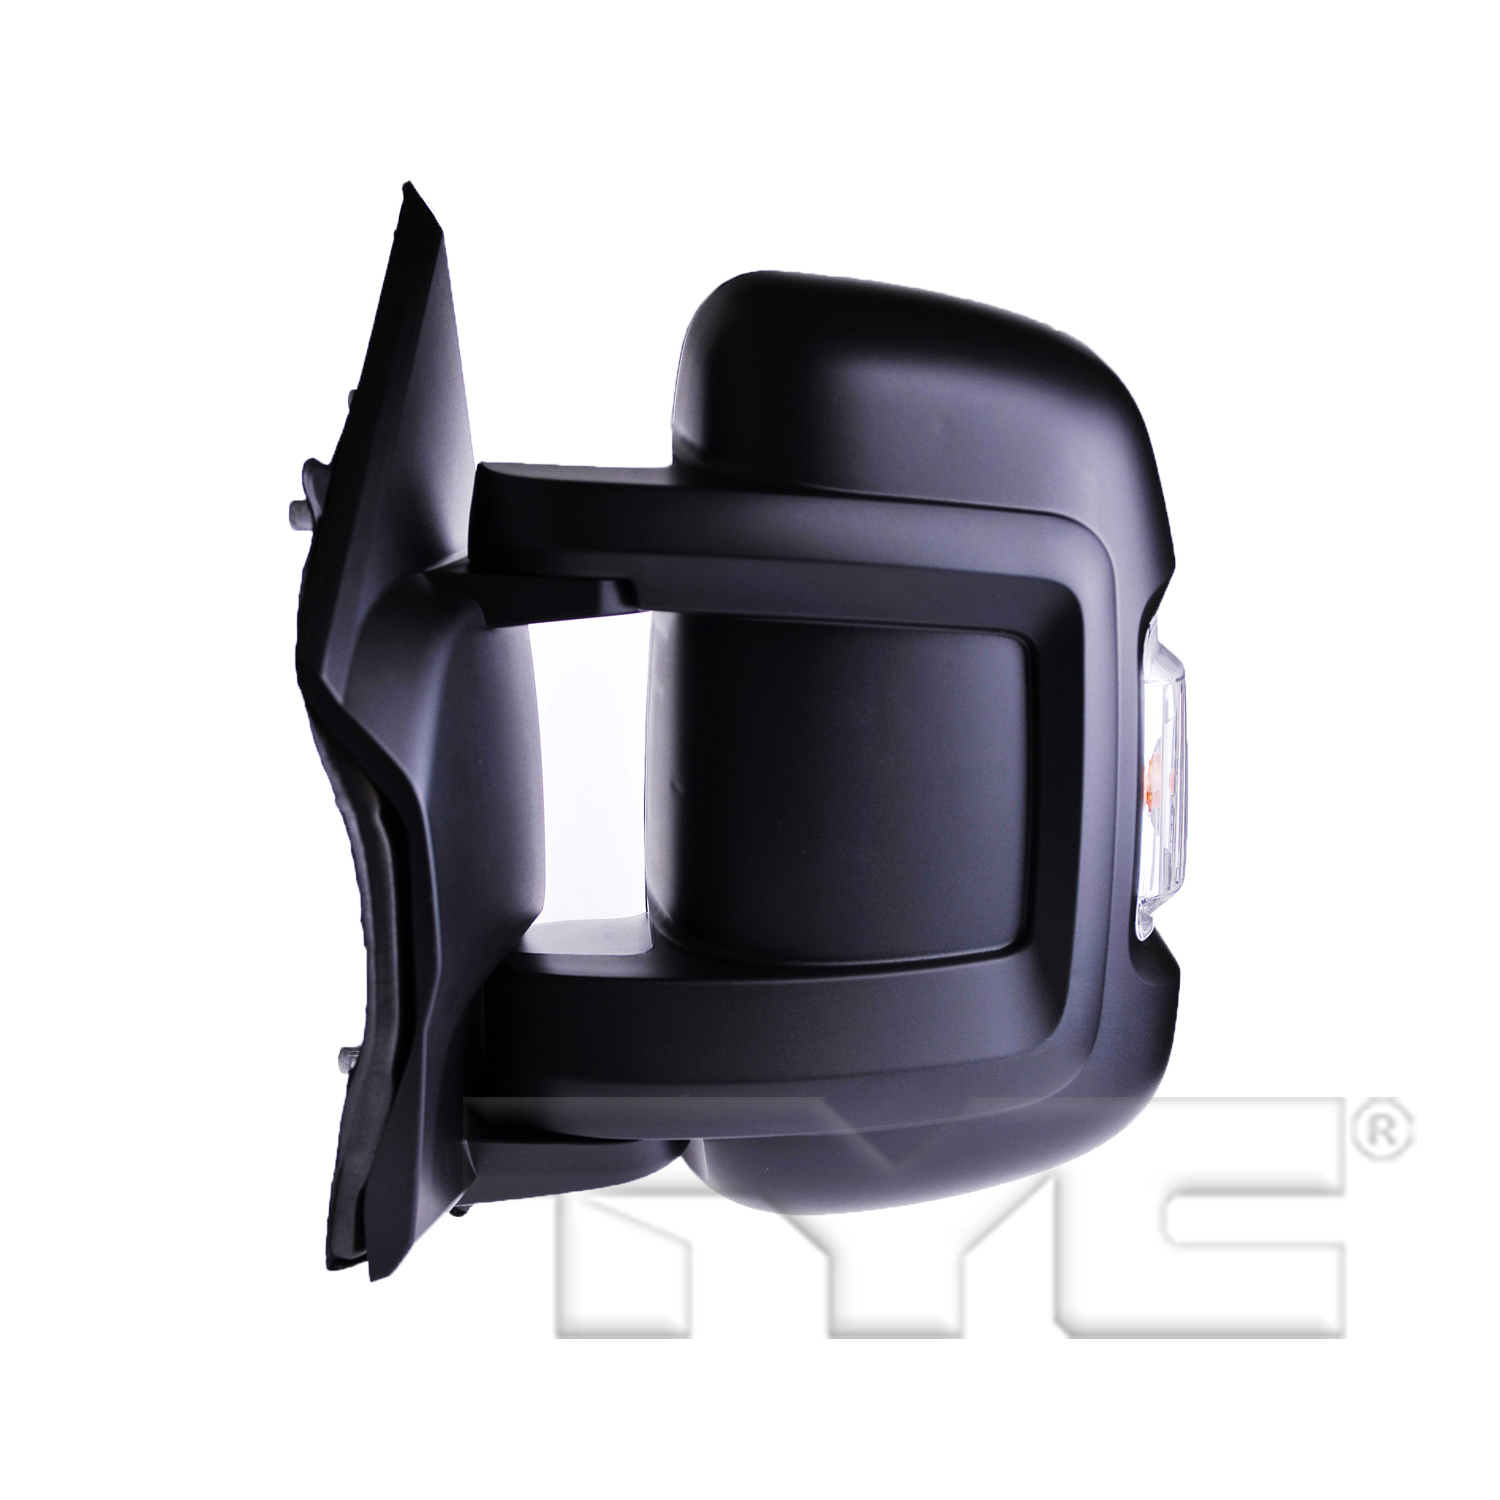 Aftermarket MIRRORS for RAM - PROMASTER 3500, PROMASTER 3500,14-23,LT Mirror outside rear view